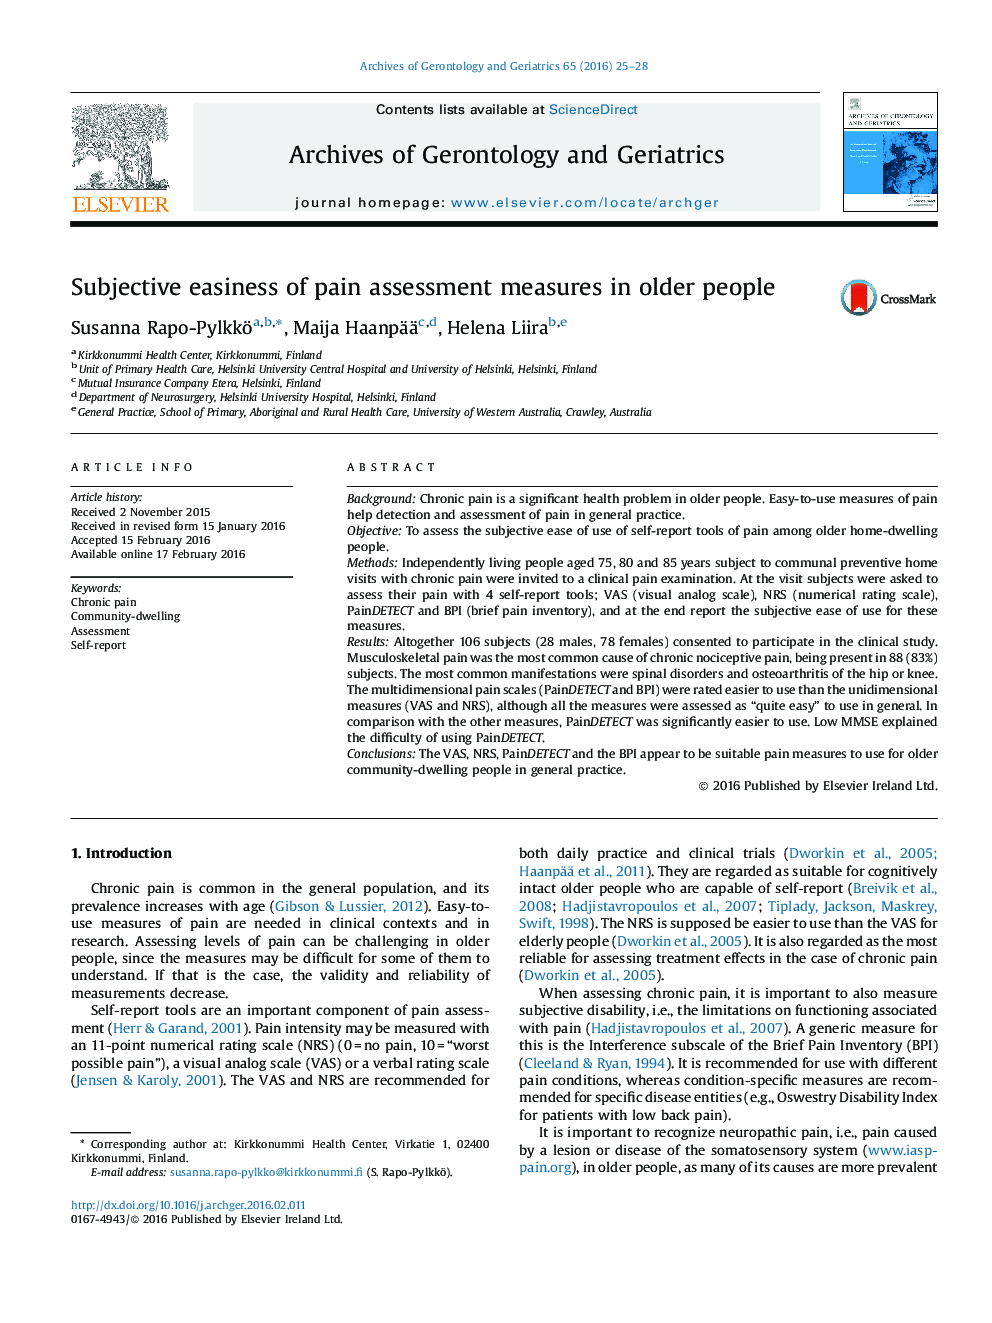 Subjective easiness of pain assessment measures in older people